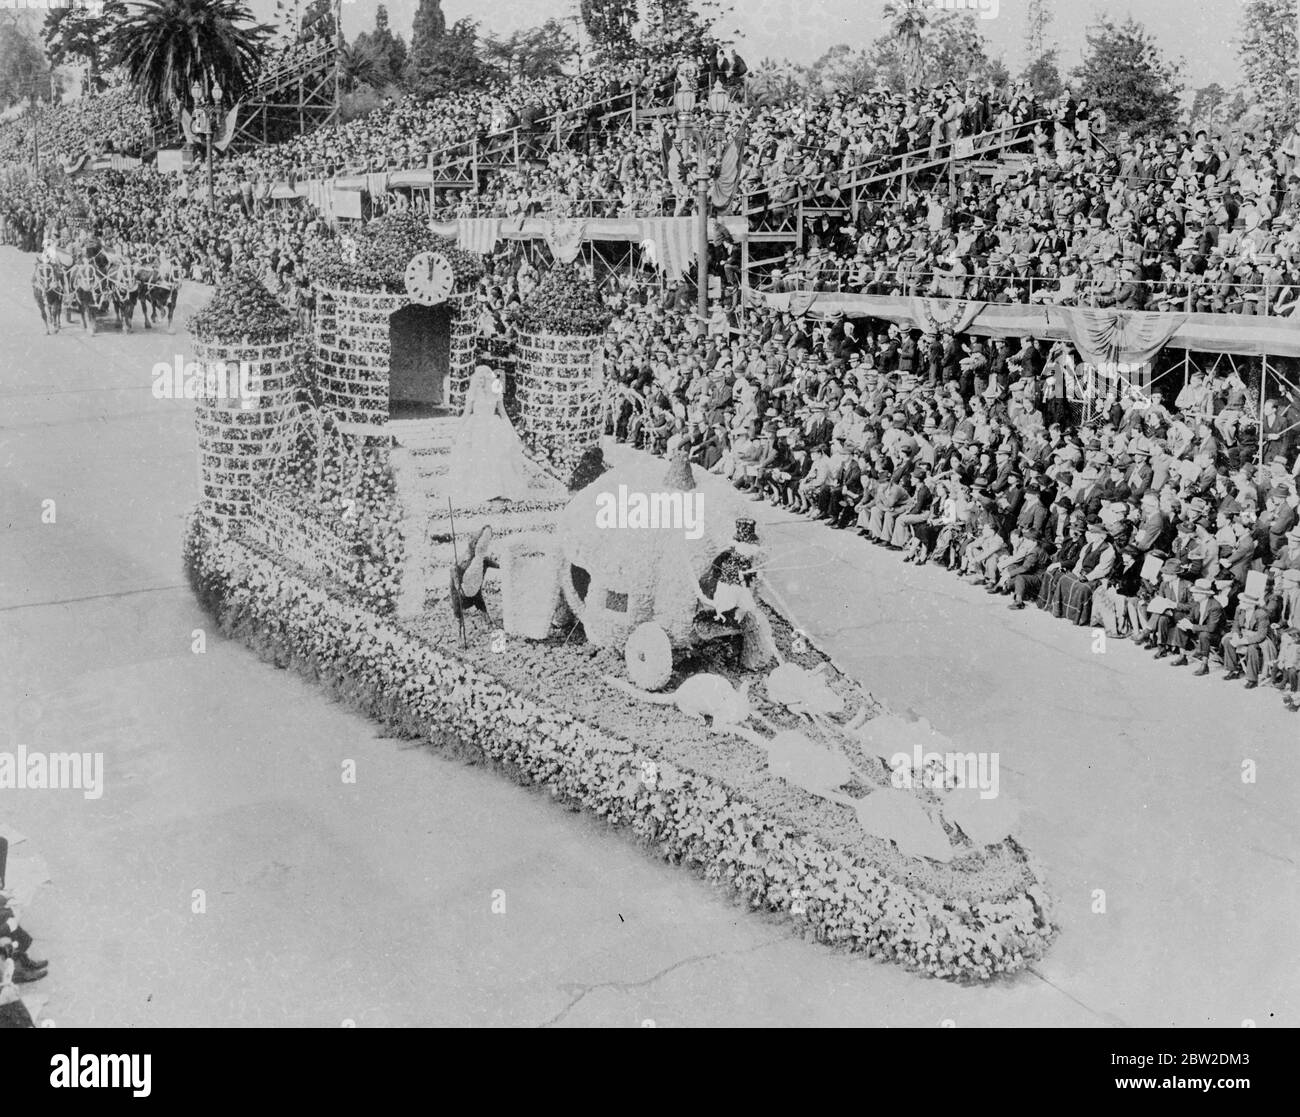 The story of Cinderella told in flowers. The story of Cinderella, complete with pumpkin coach and white mice beautifully made out of thousands of blossoms won the first prize at the Pasadea tournament of Roses, California. 11 January 1938 Stock Photo